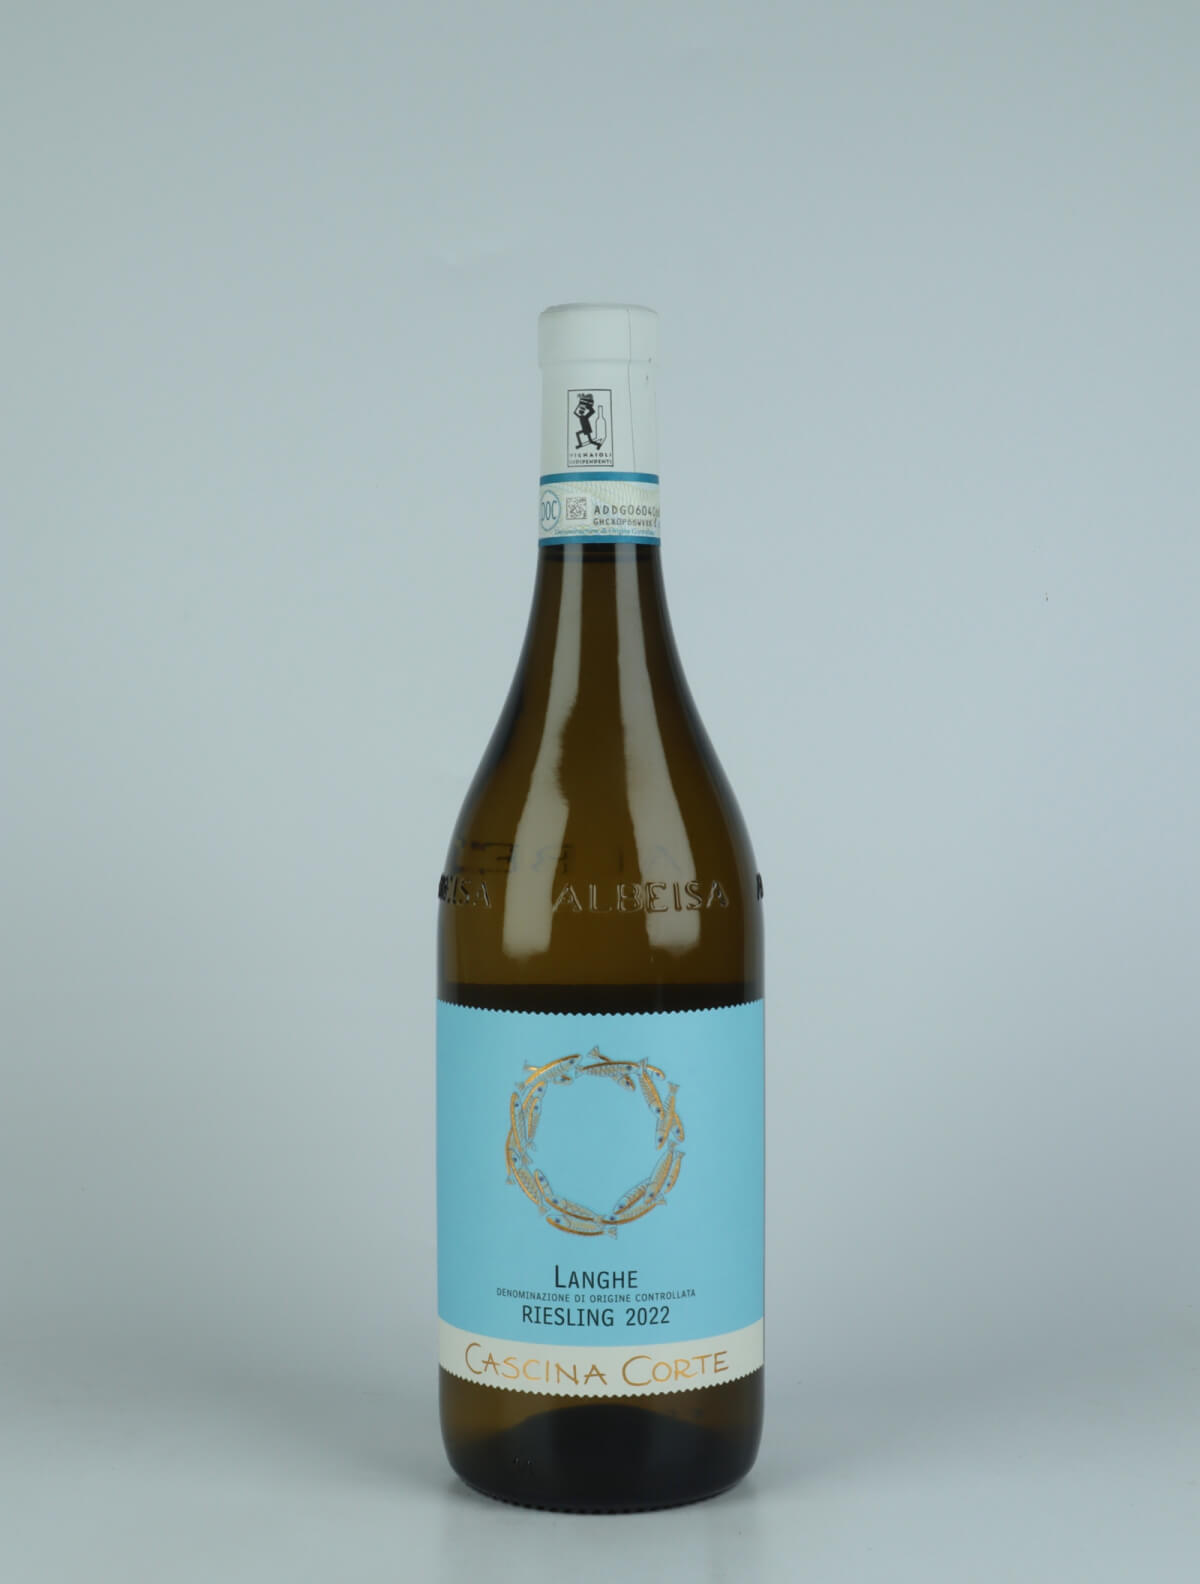 A bottle 2022 Langhe Riesling White wine from Cascina Corte, Piedmont in Italy